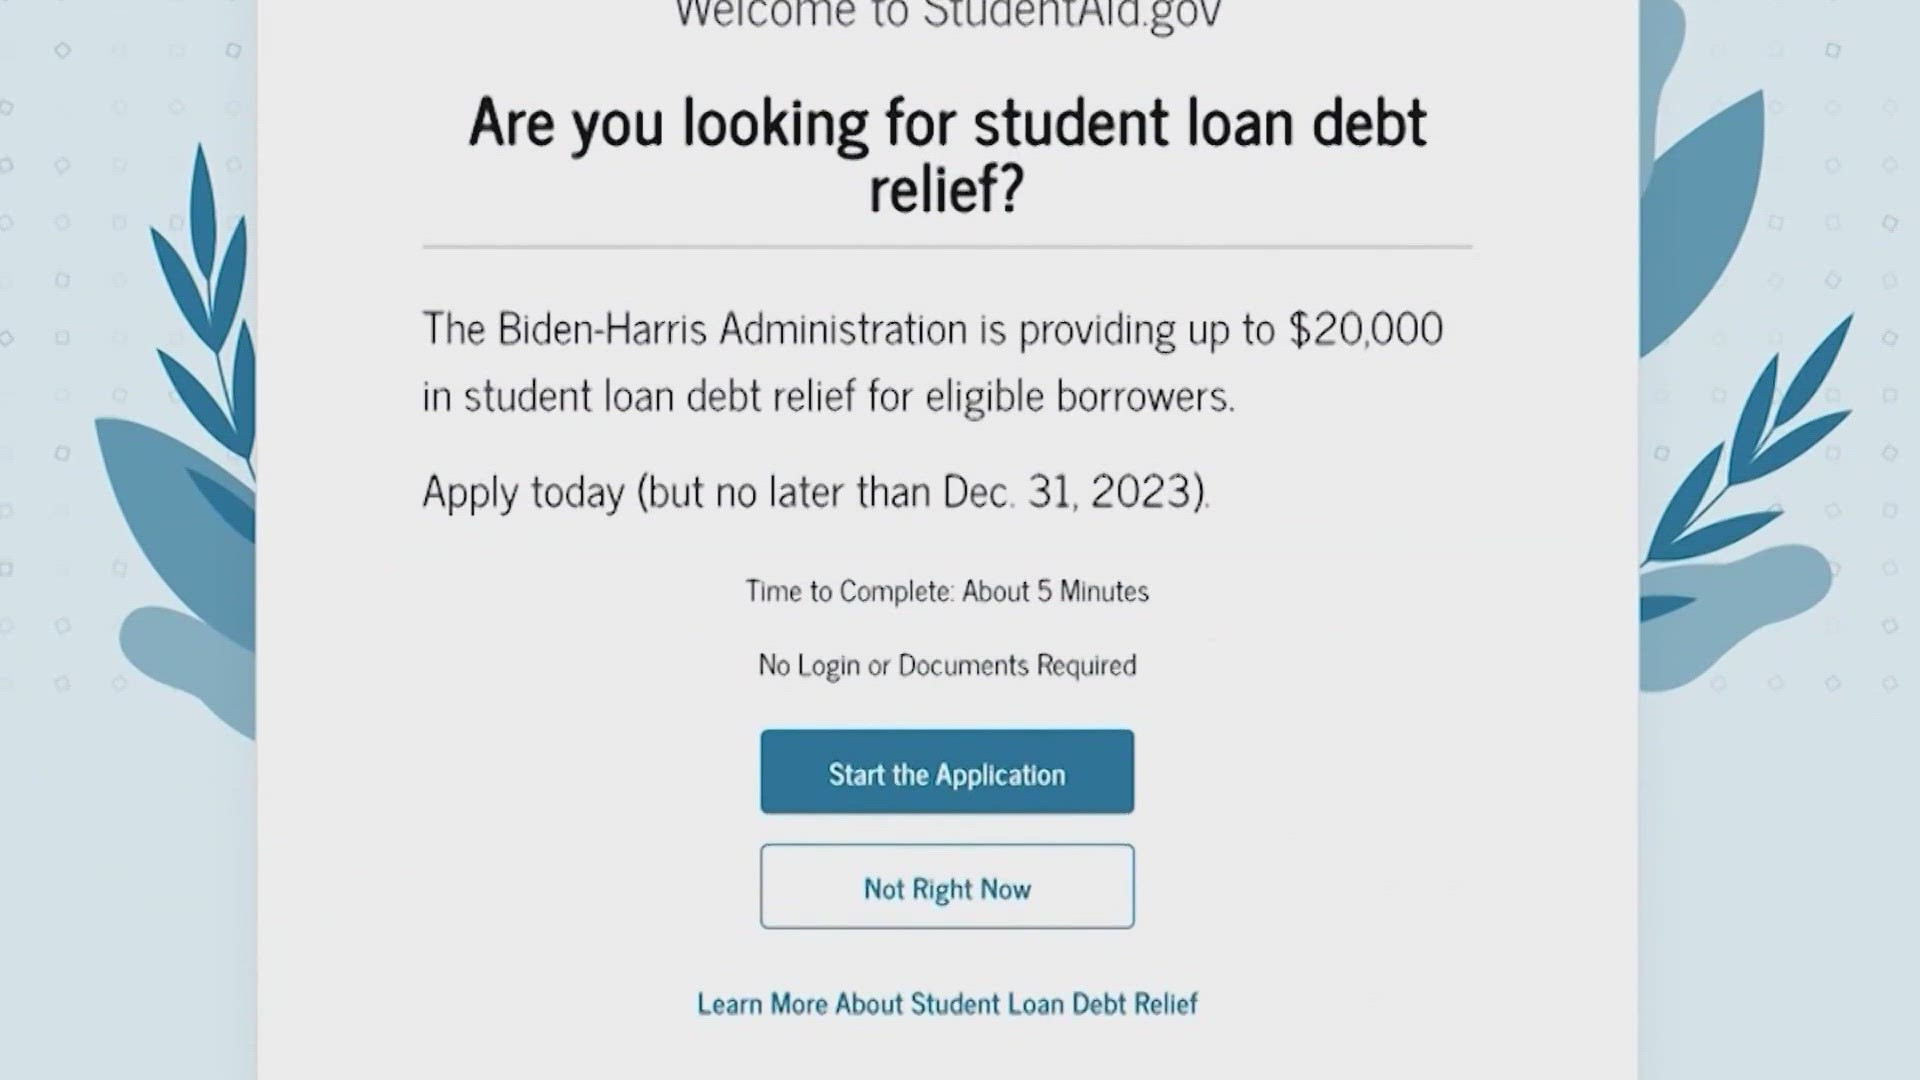 A bill in the House aims to repeal President Biden's student debt relief program.